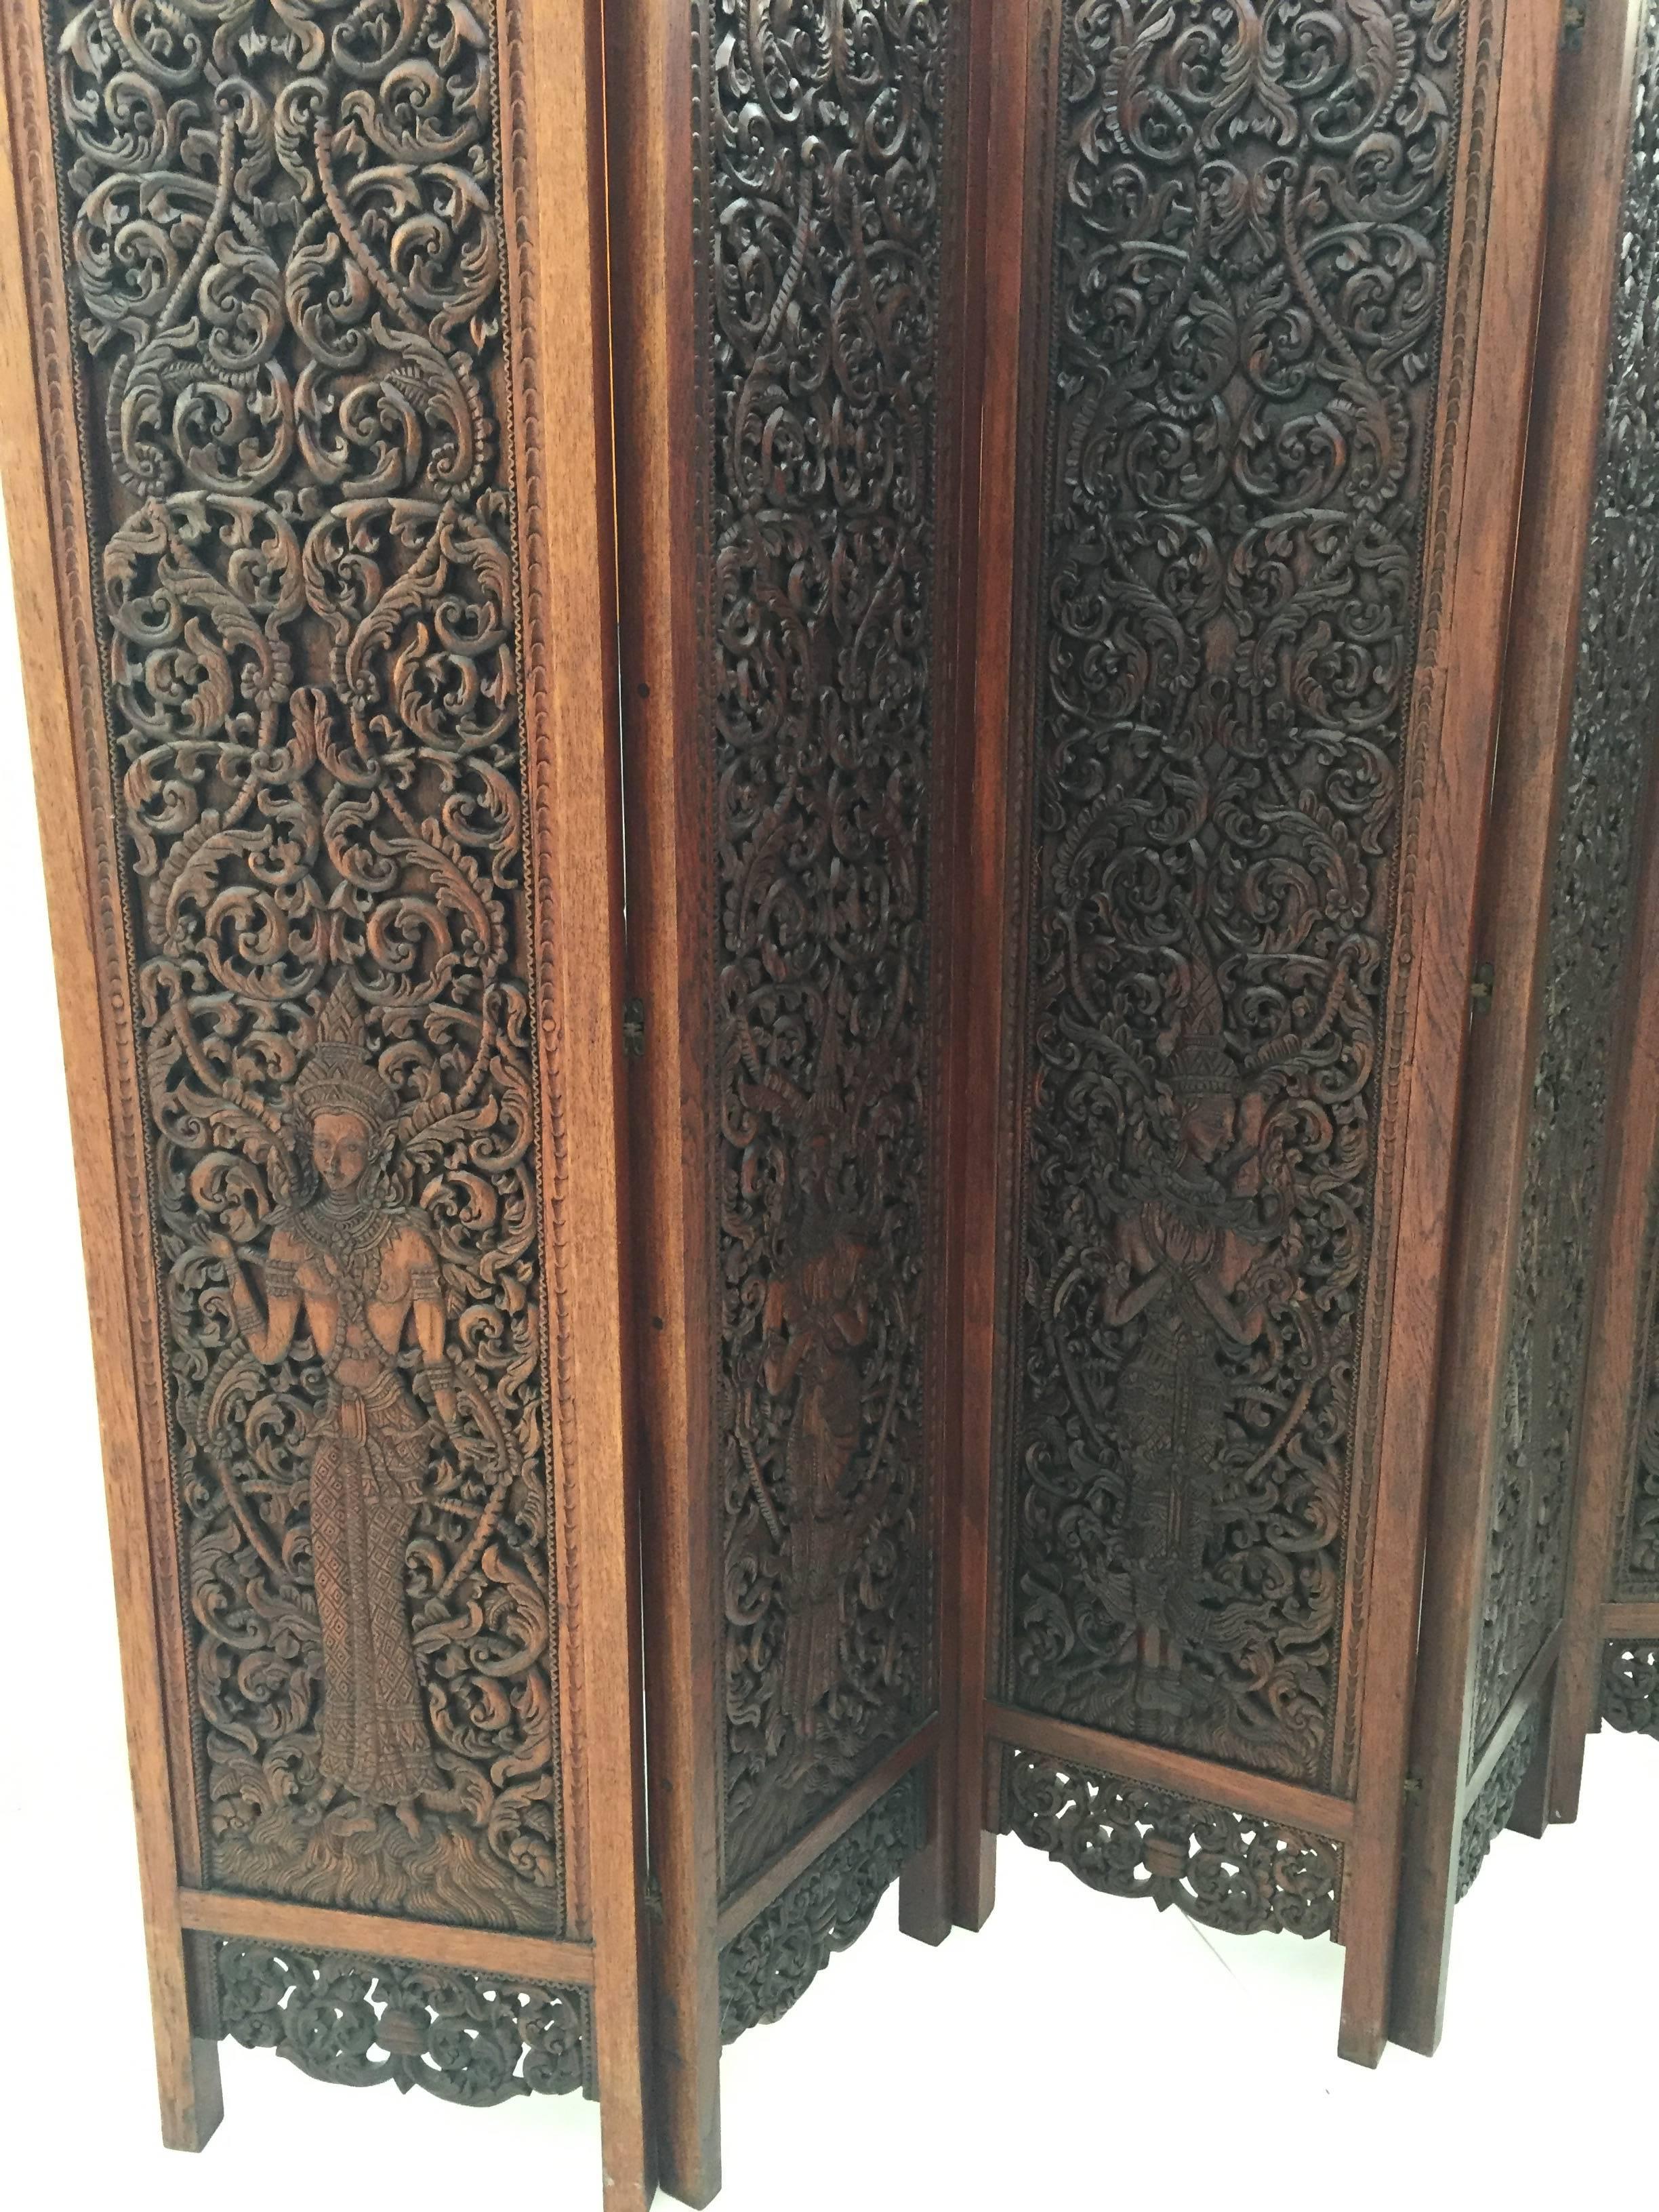 Thai Asian Hand-Carved Wood Five Panels Double-Sided Folding Screen Room Divider